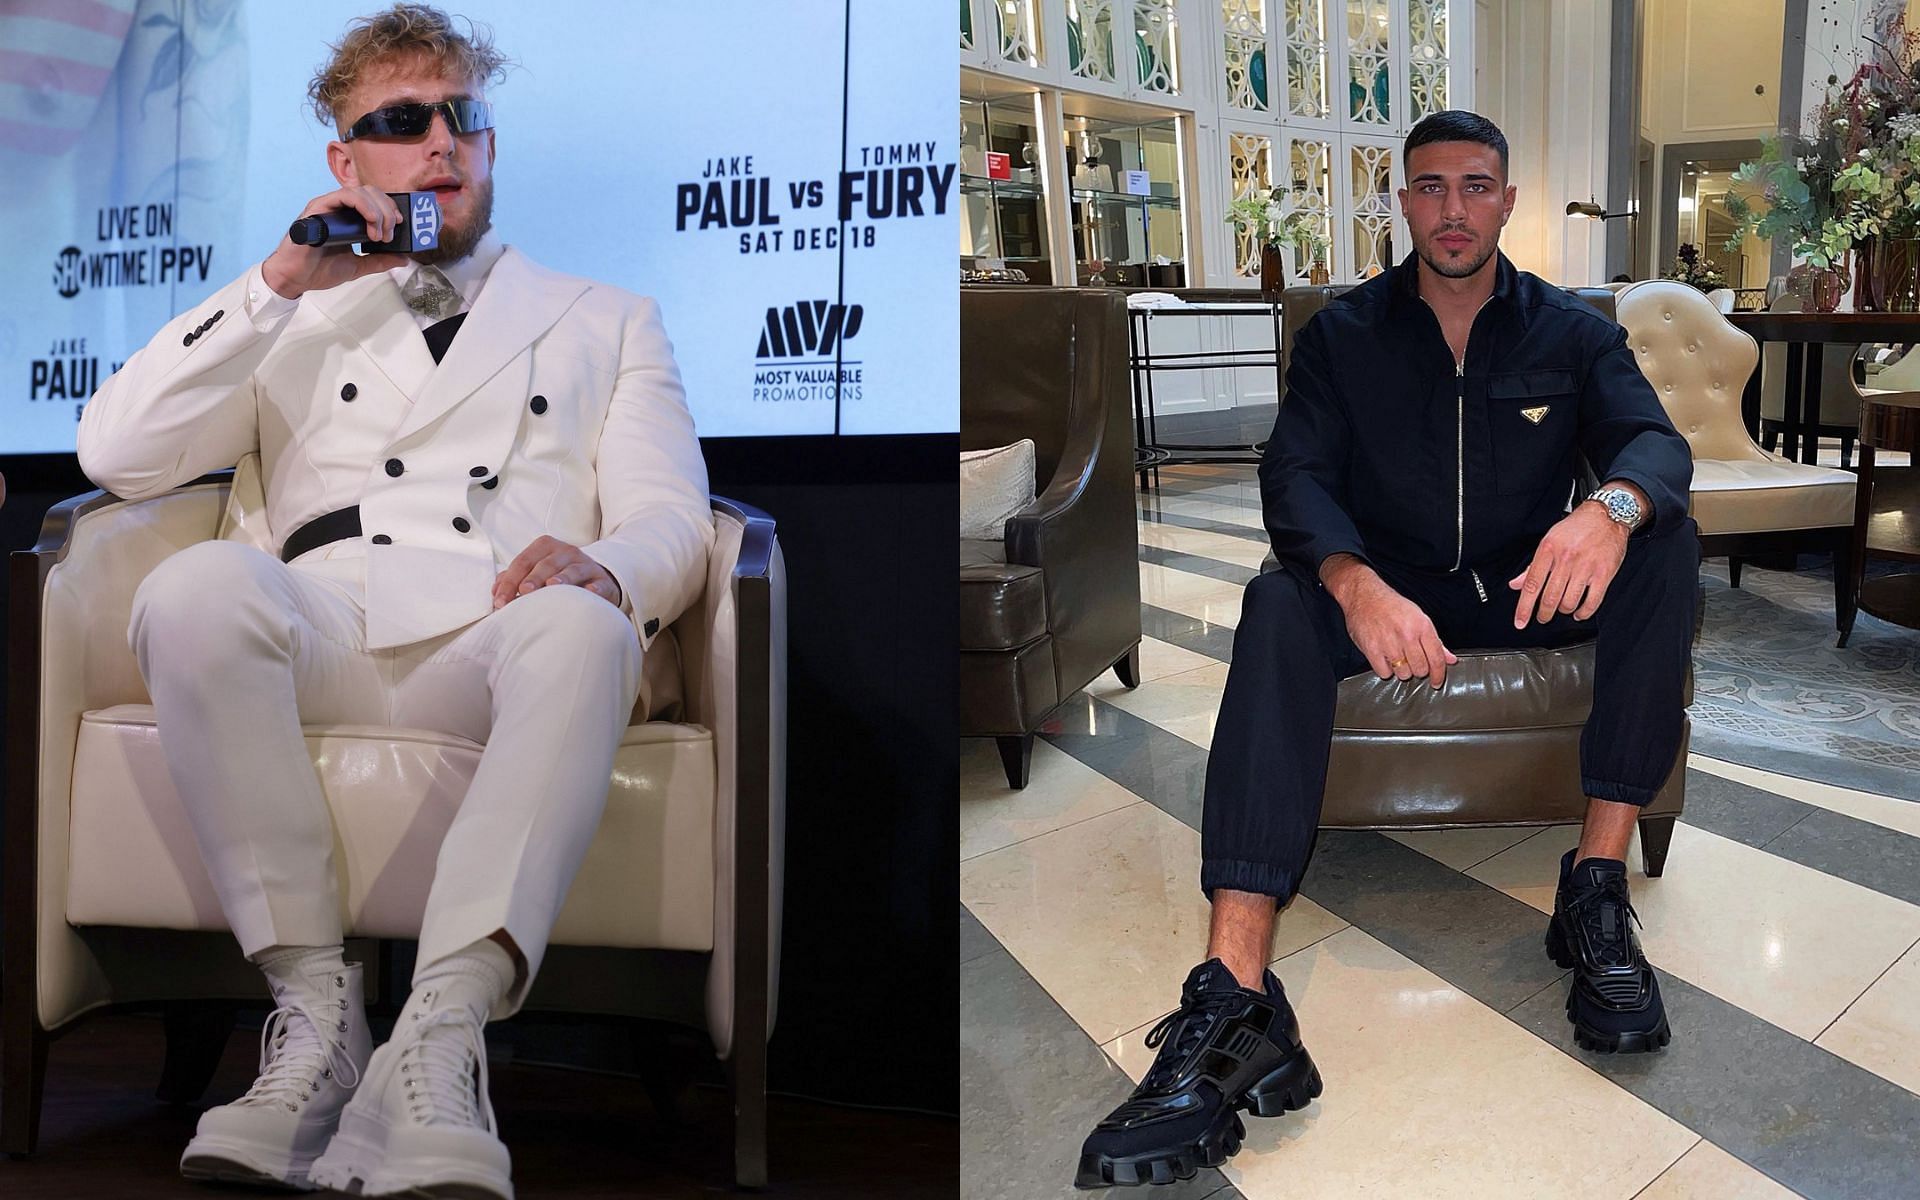 Jake Paul (left) &amp; Tommy Fury (right) [Image Credits- @tommyfury on Instagram]